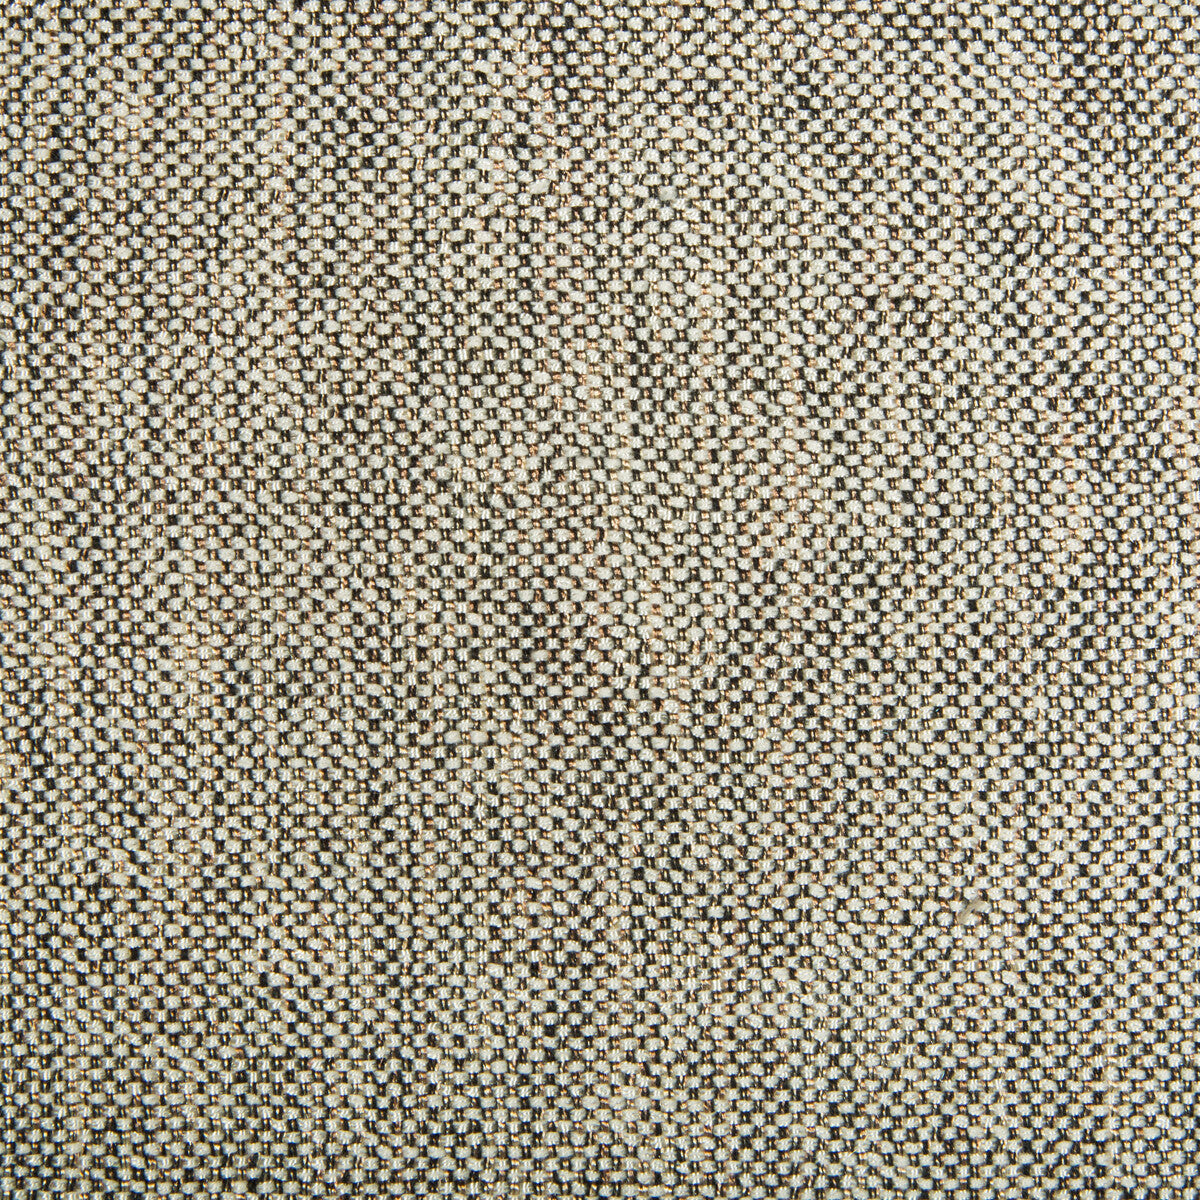 Kravet Contract fabric in 34926-816 color - pattern 34926.816.0 - by Kravet Contract